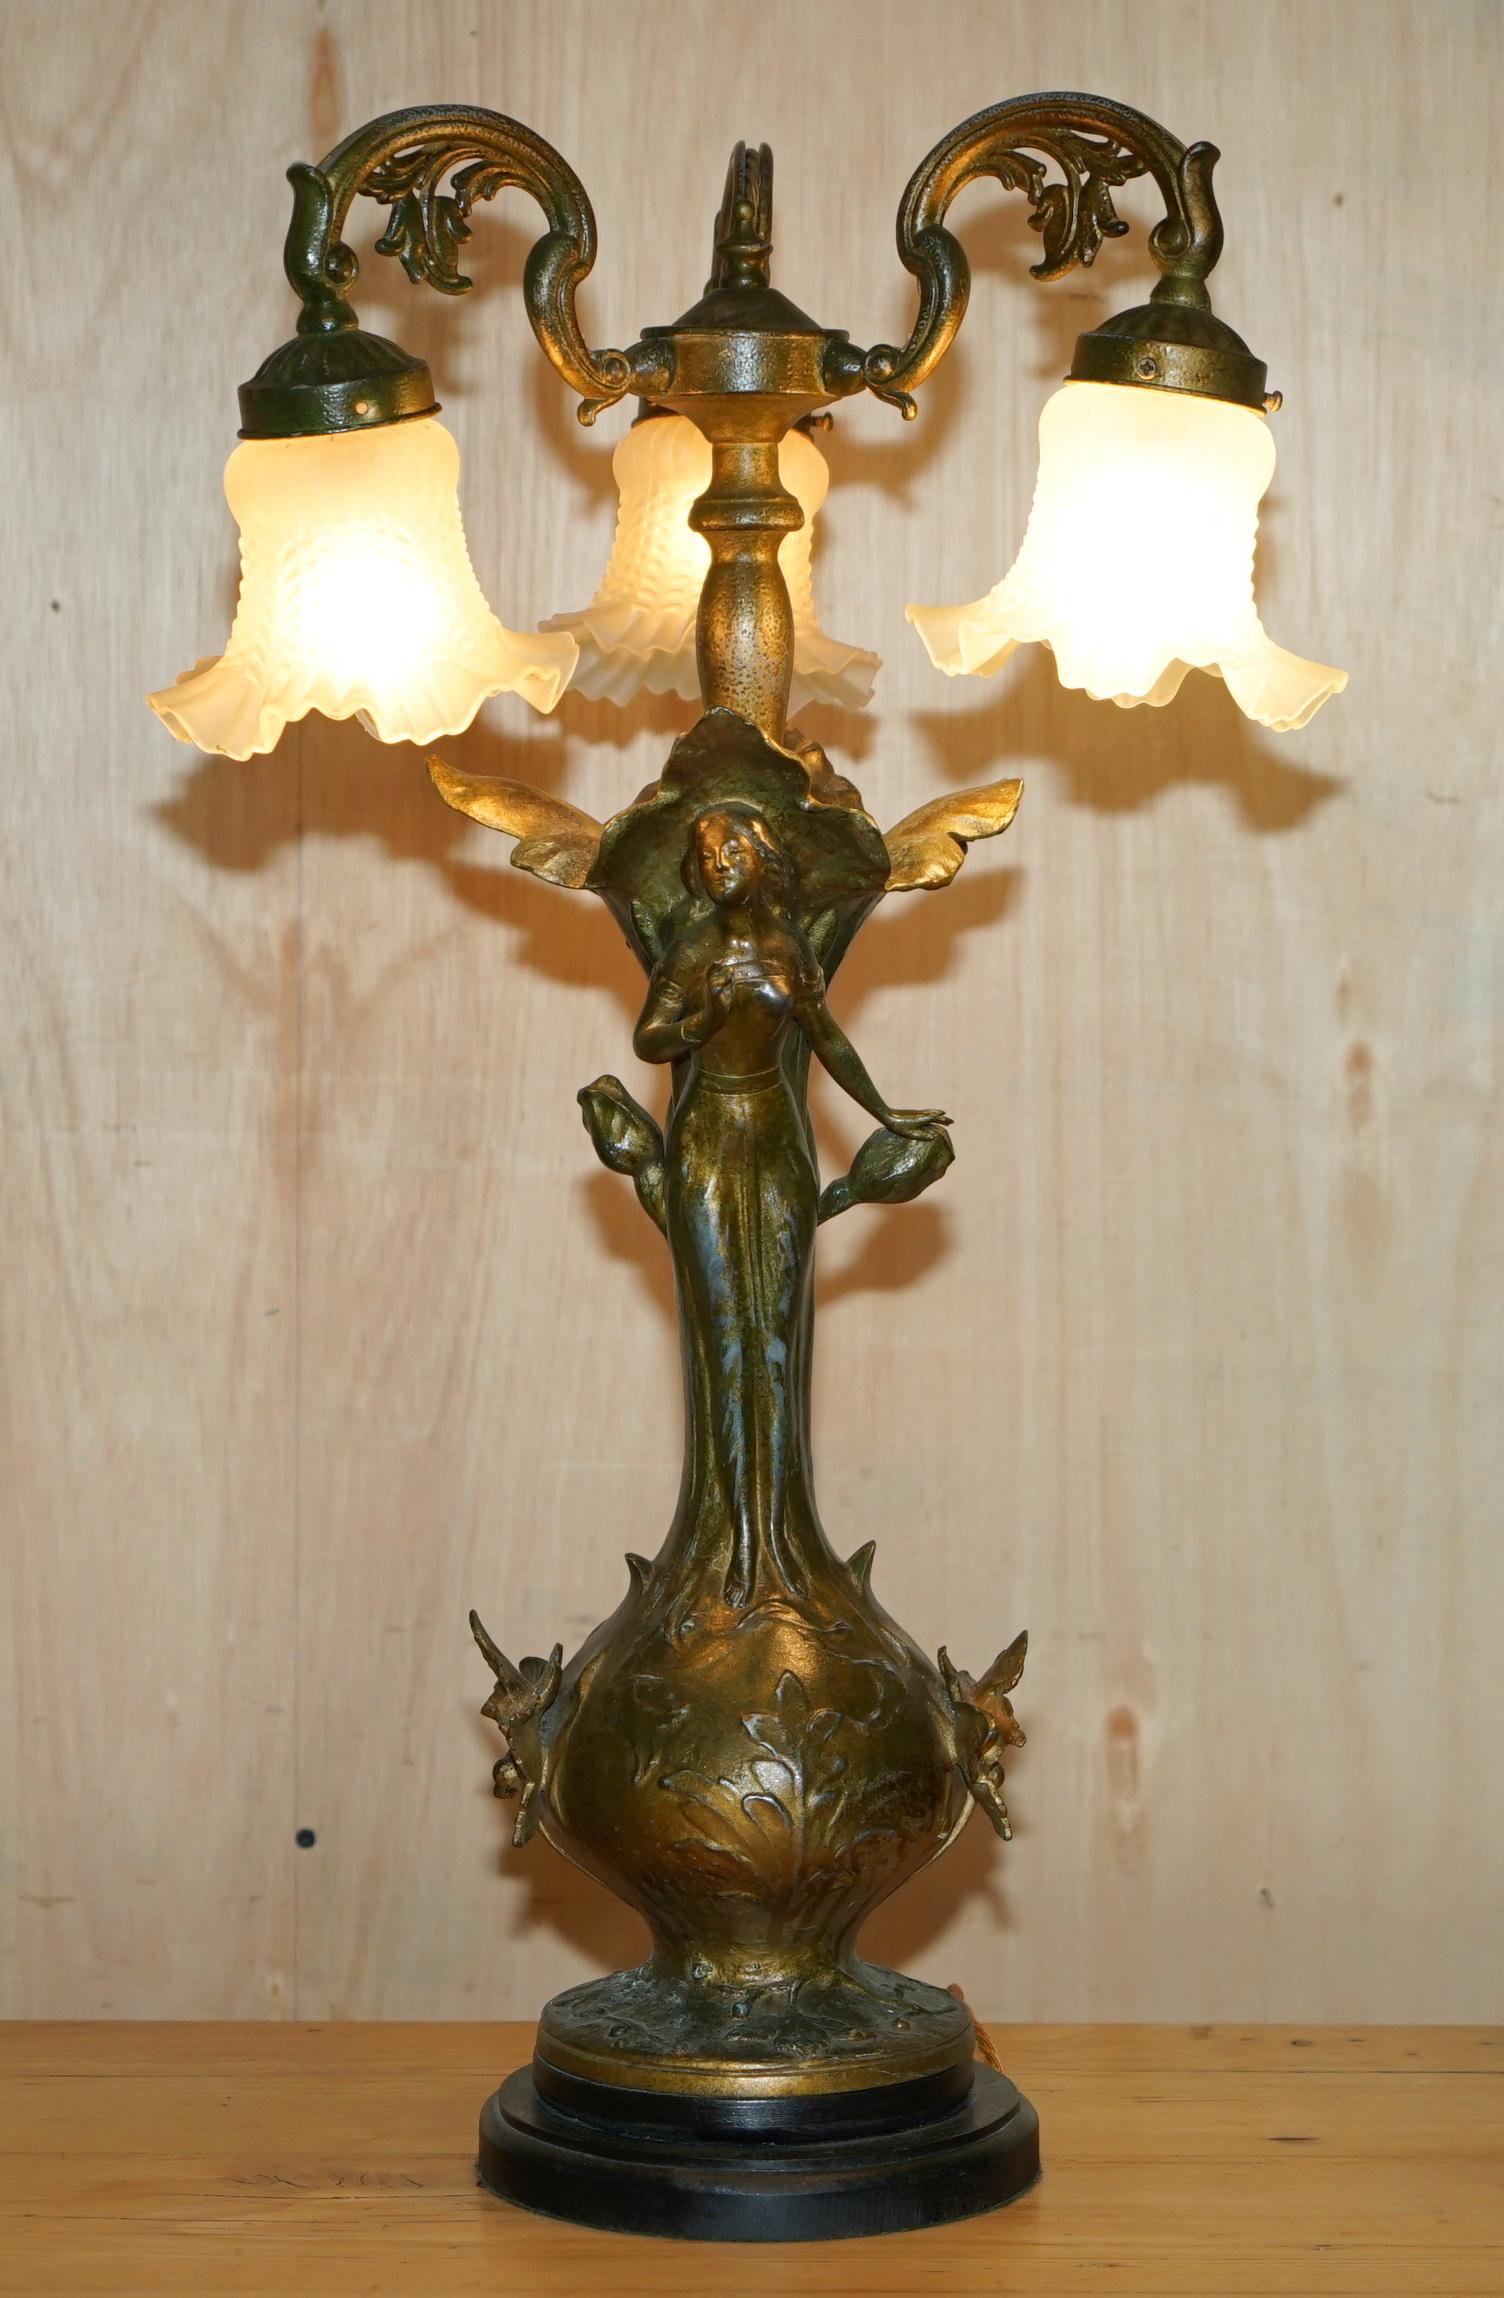 STUNNING PAIR OF LARGE ViNTAGE ART NOUVEAU BRONZED THREE BRANCH TABLE LAMPS For Sale 9